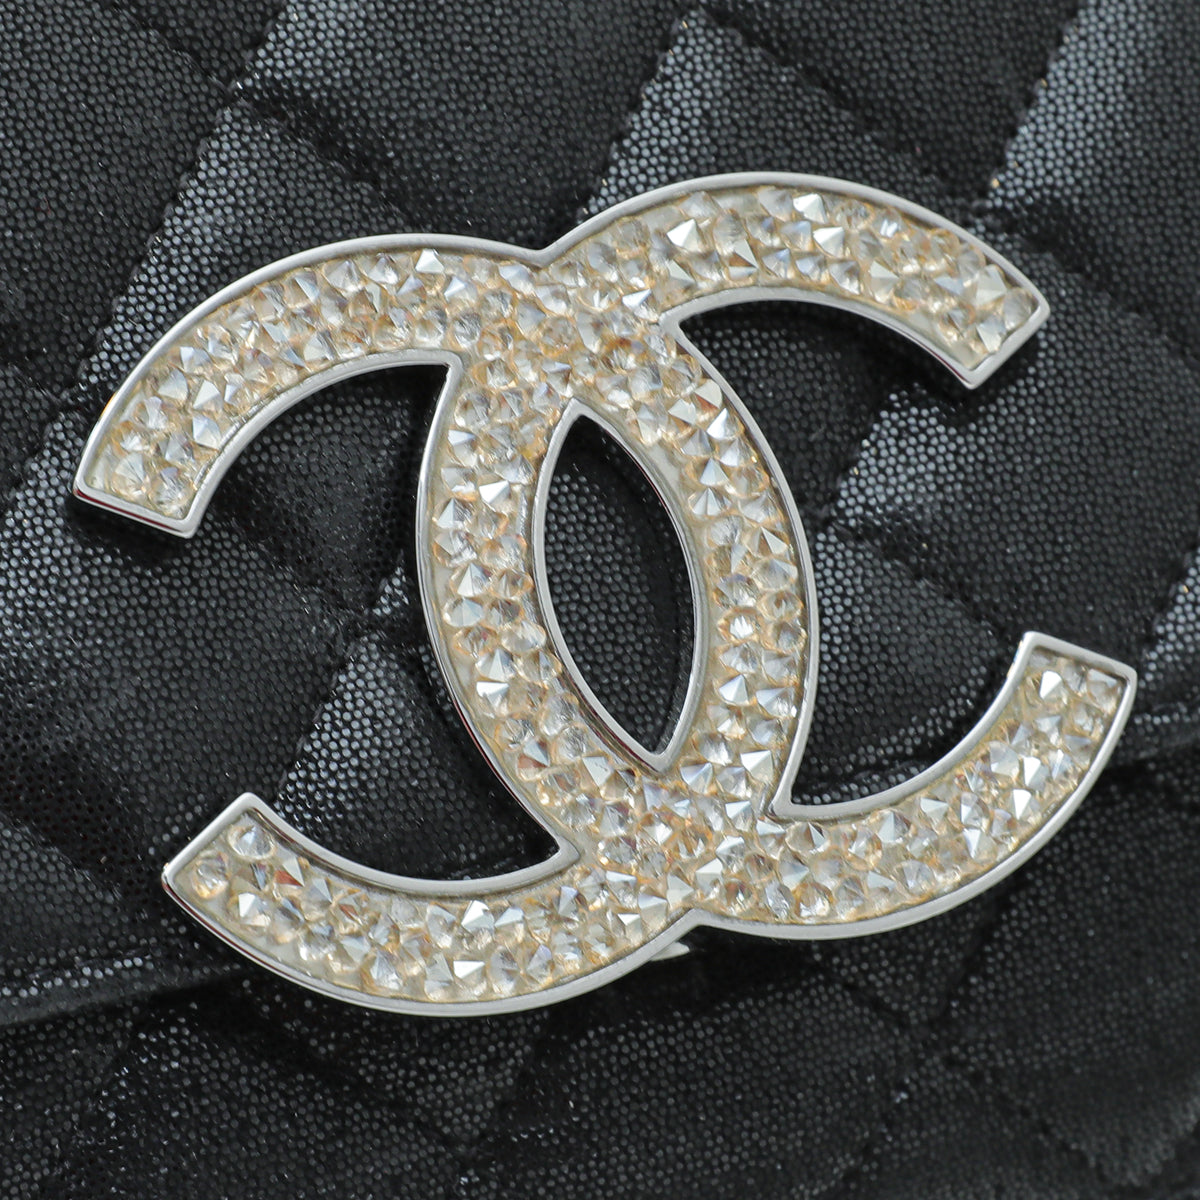 Chanel Black CC Strass Embellished Wallet on Chain